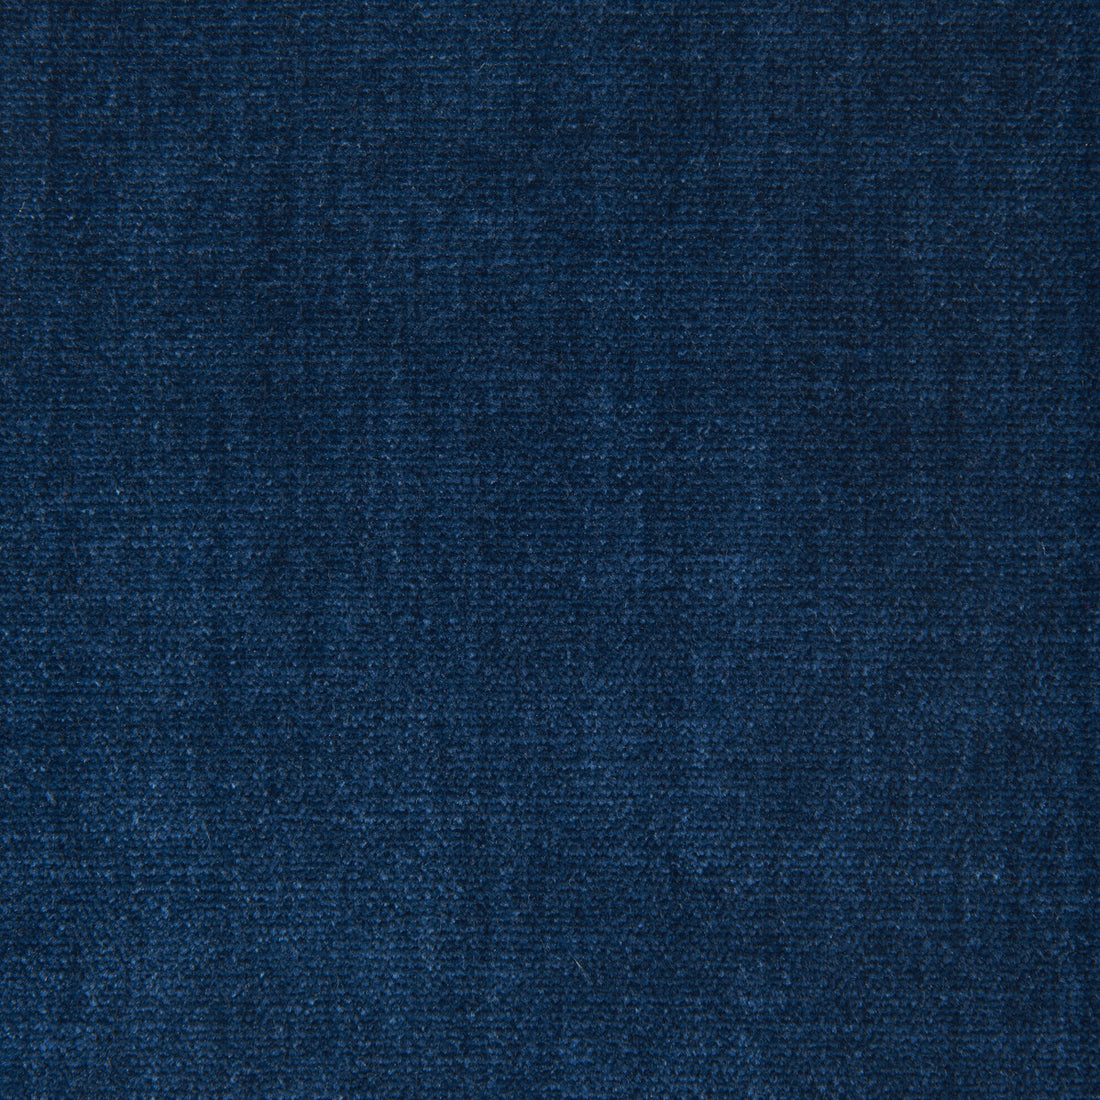 Kravet Smart fabric in 36076-535 color - pattern 36076.535.0 - by Kravet Smart in the Sumptuous Chenille II collection